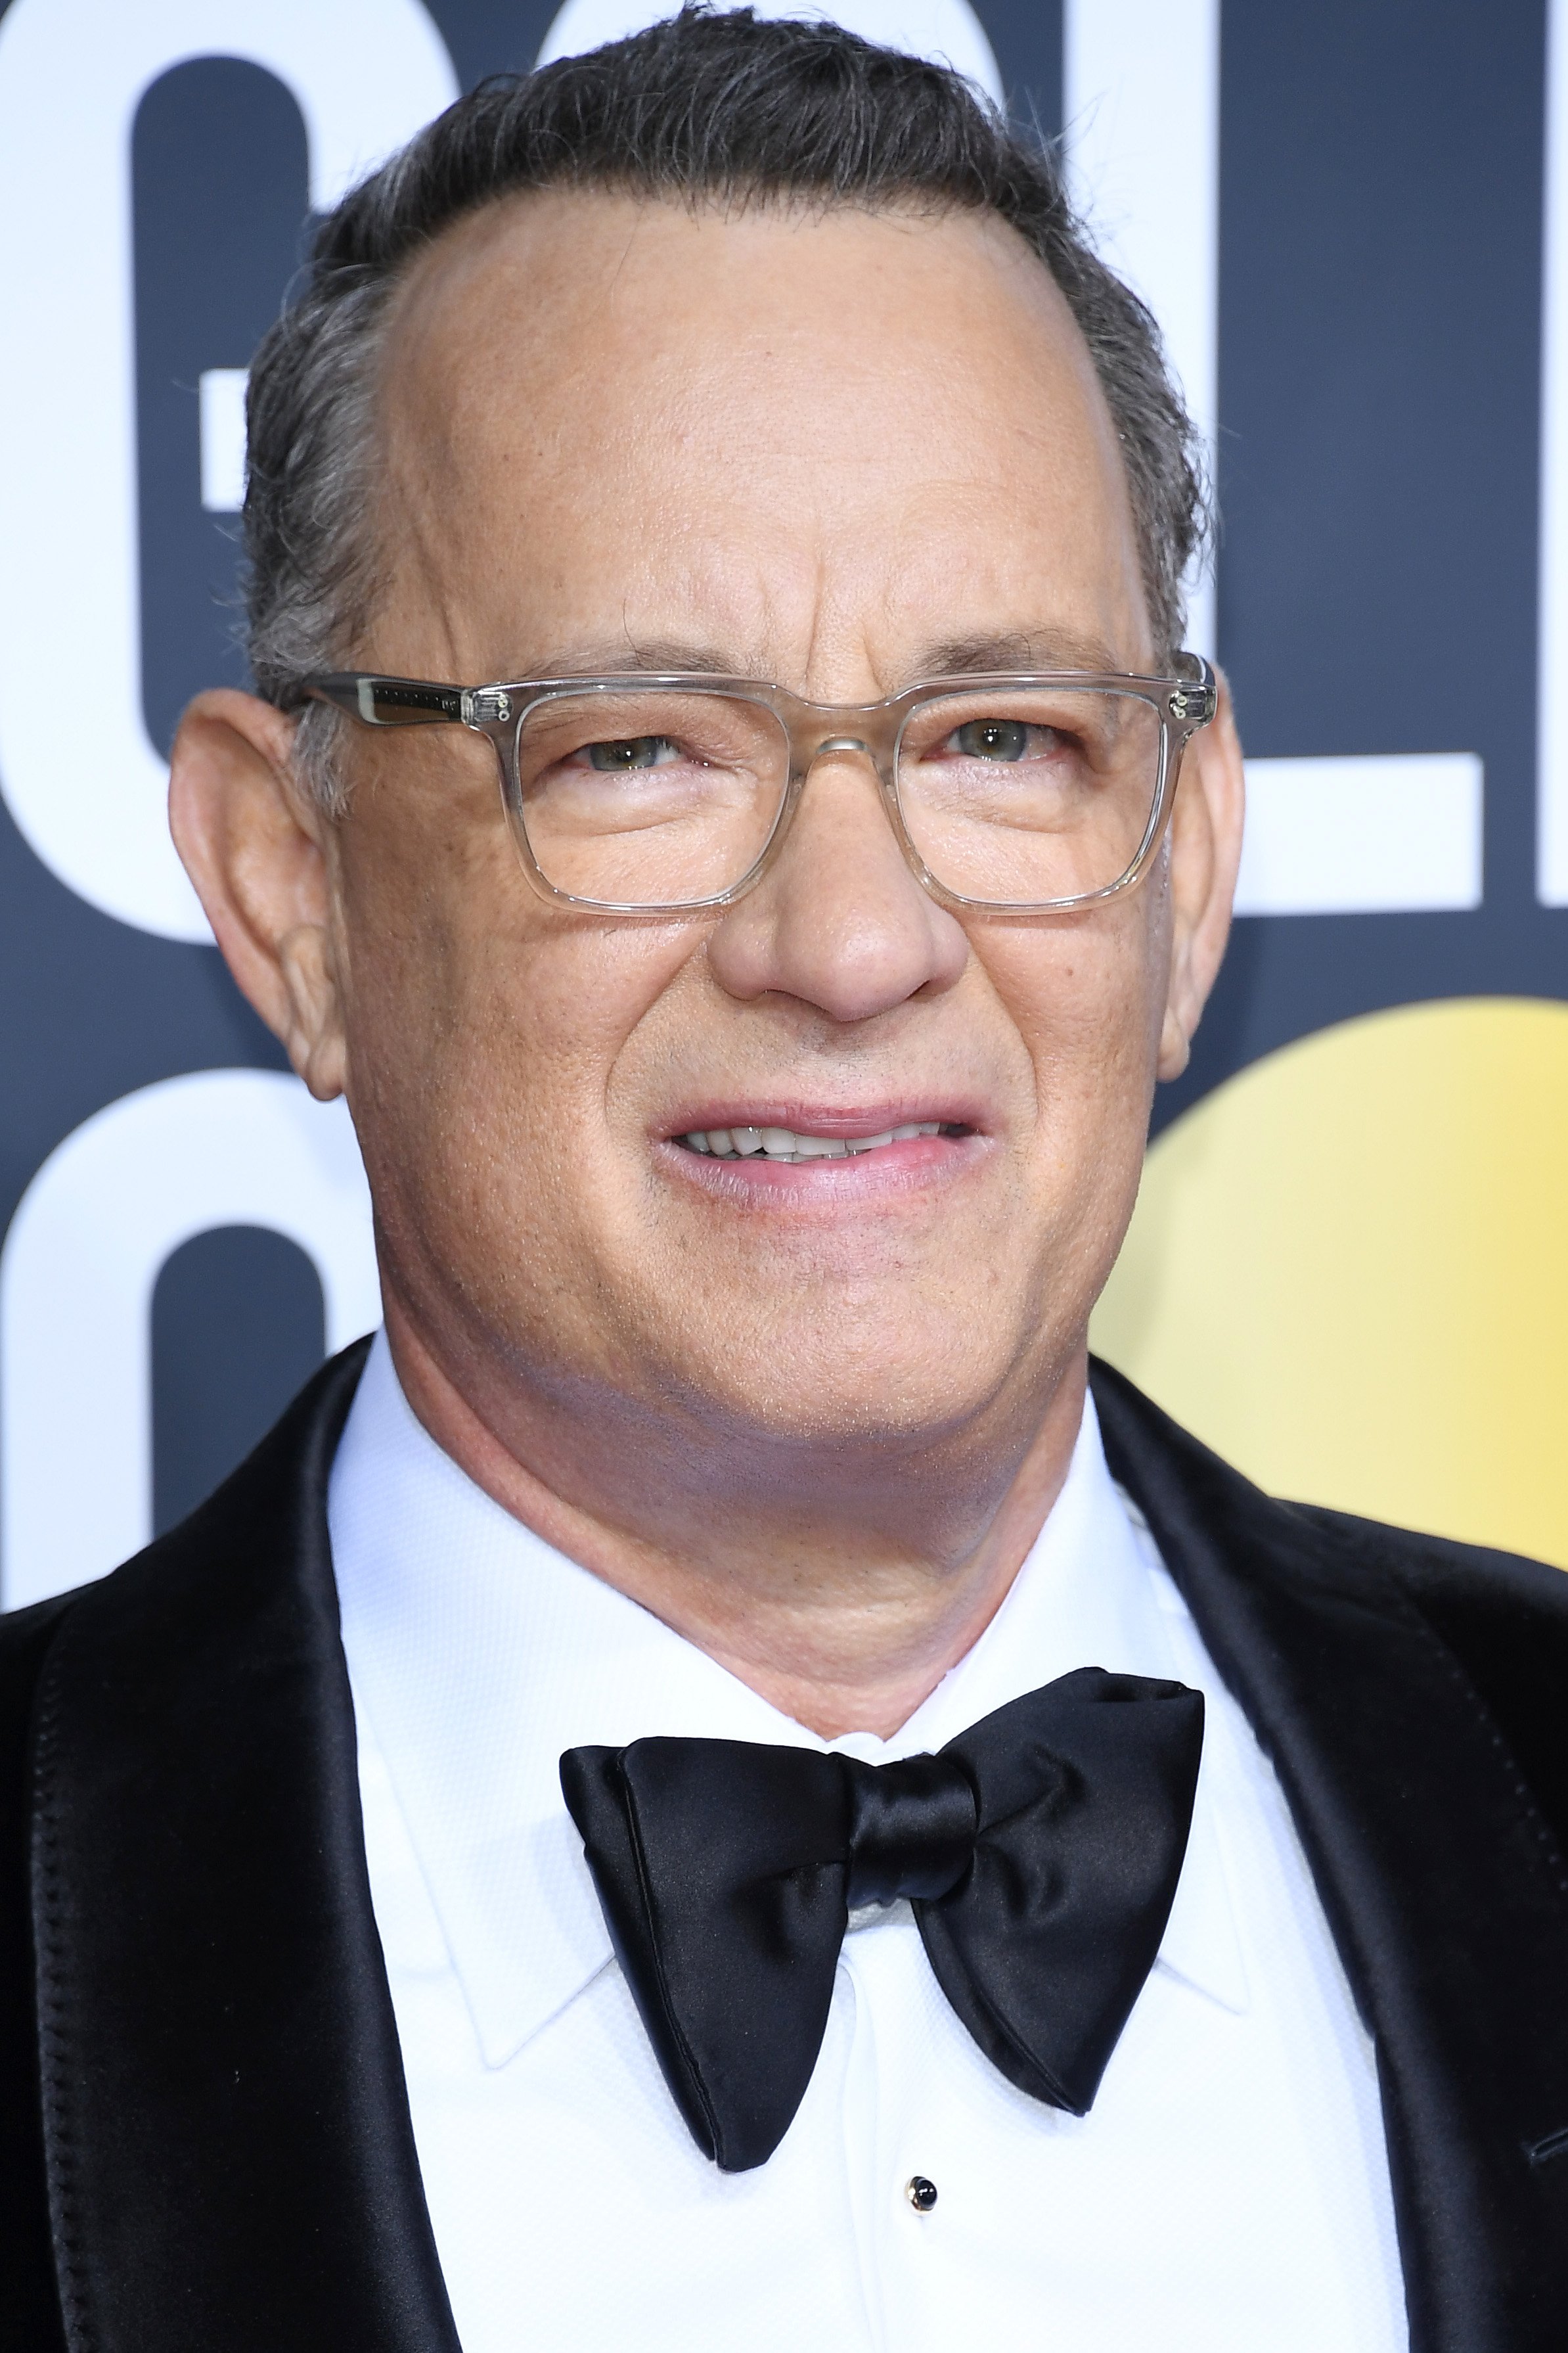 Tom Hanks at the 77th Annual Golden Globe Awards at The Beverly Hilton Hotel in Beverly Hills, California | Photo: Daniele Venturelli/WireImage